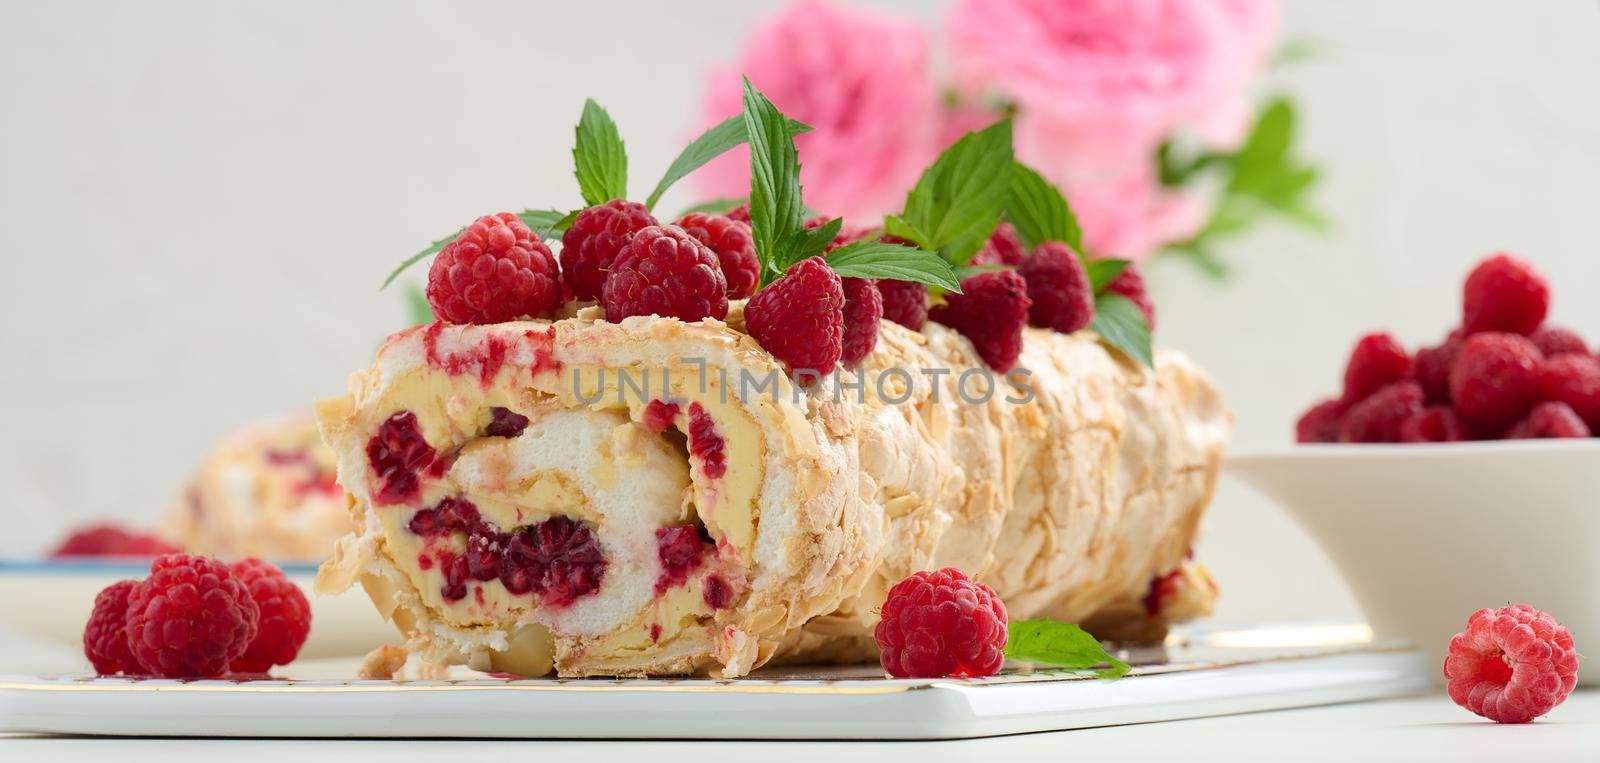 Baked meringue roll with cream and fresh fruits on a white wooden board, delicious dessert